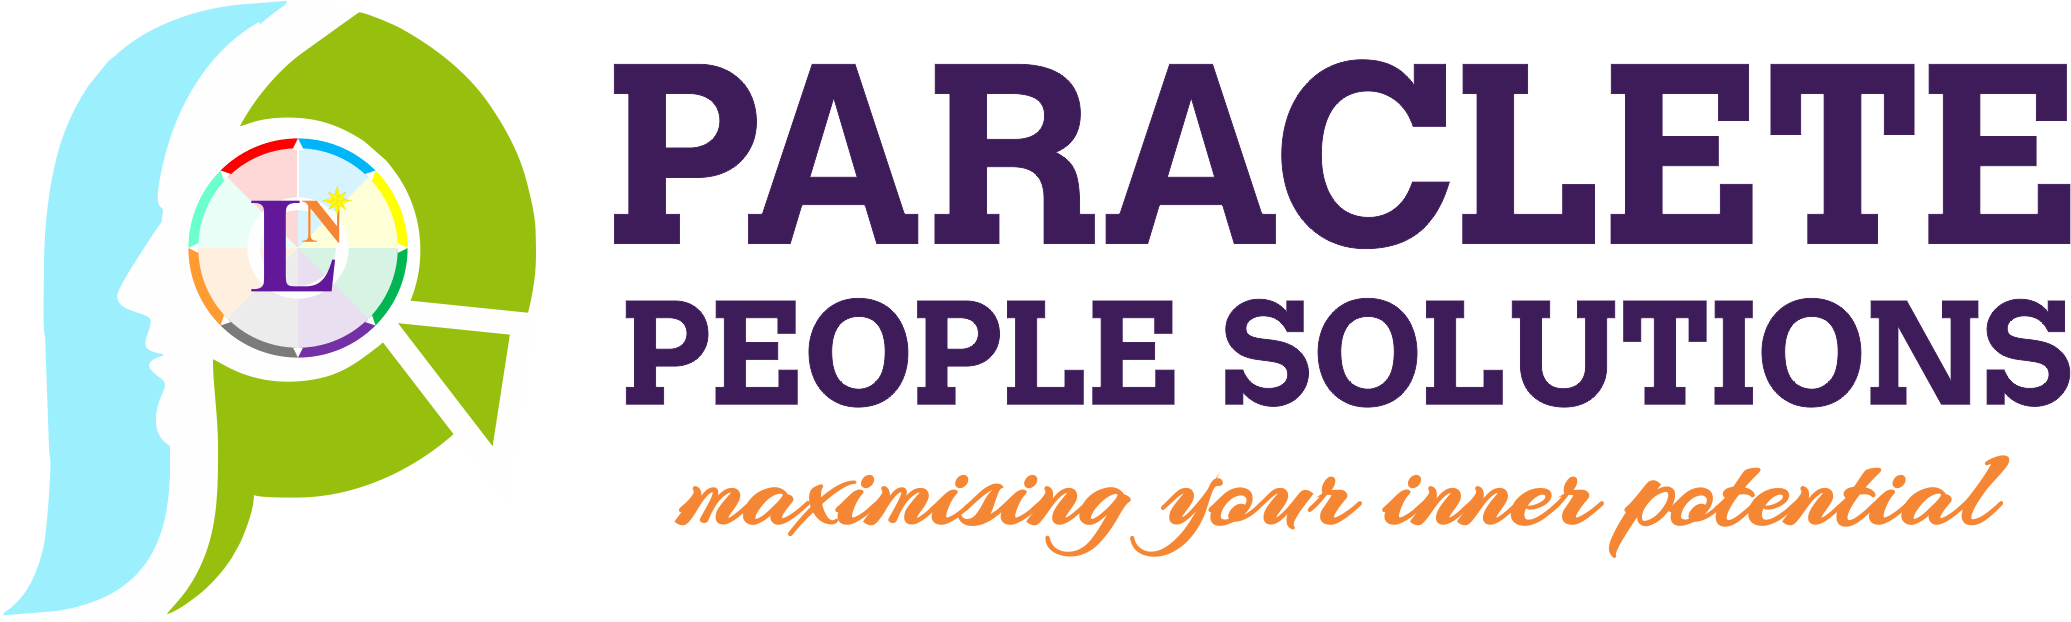 Paraclete People Solutions